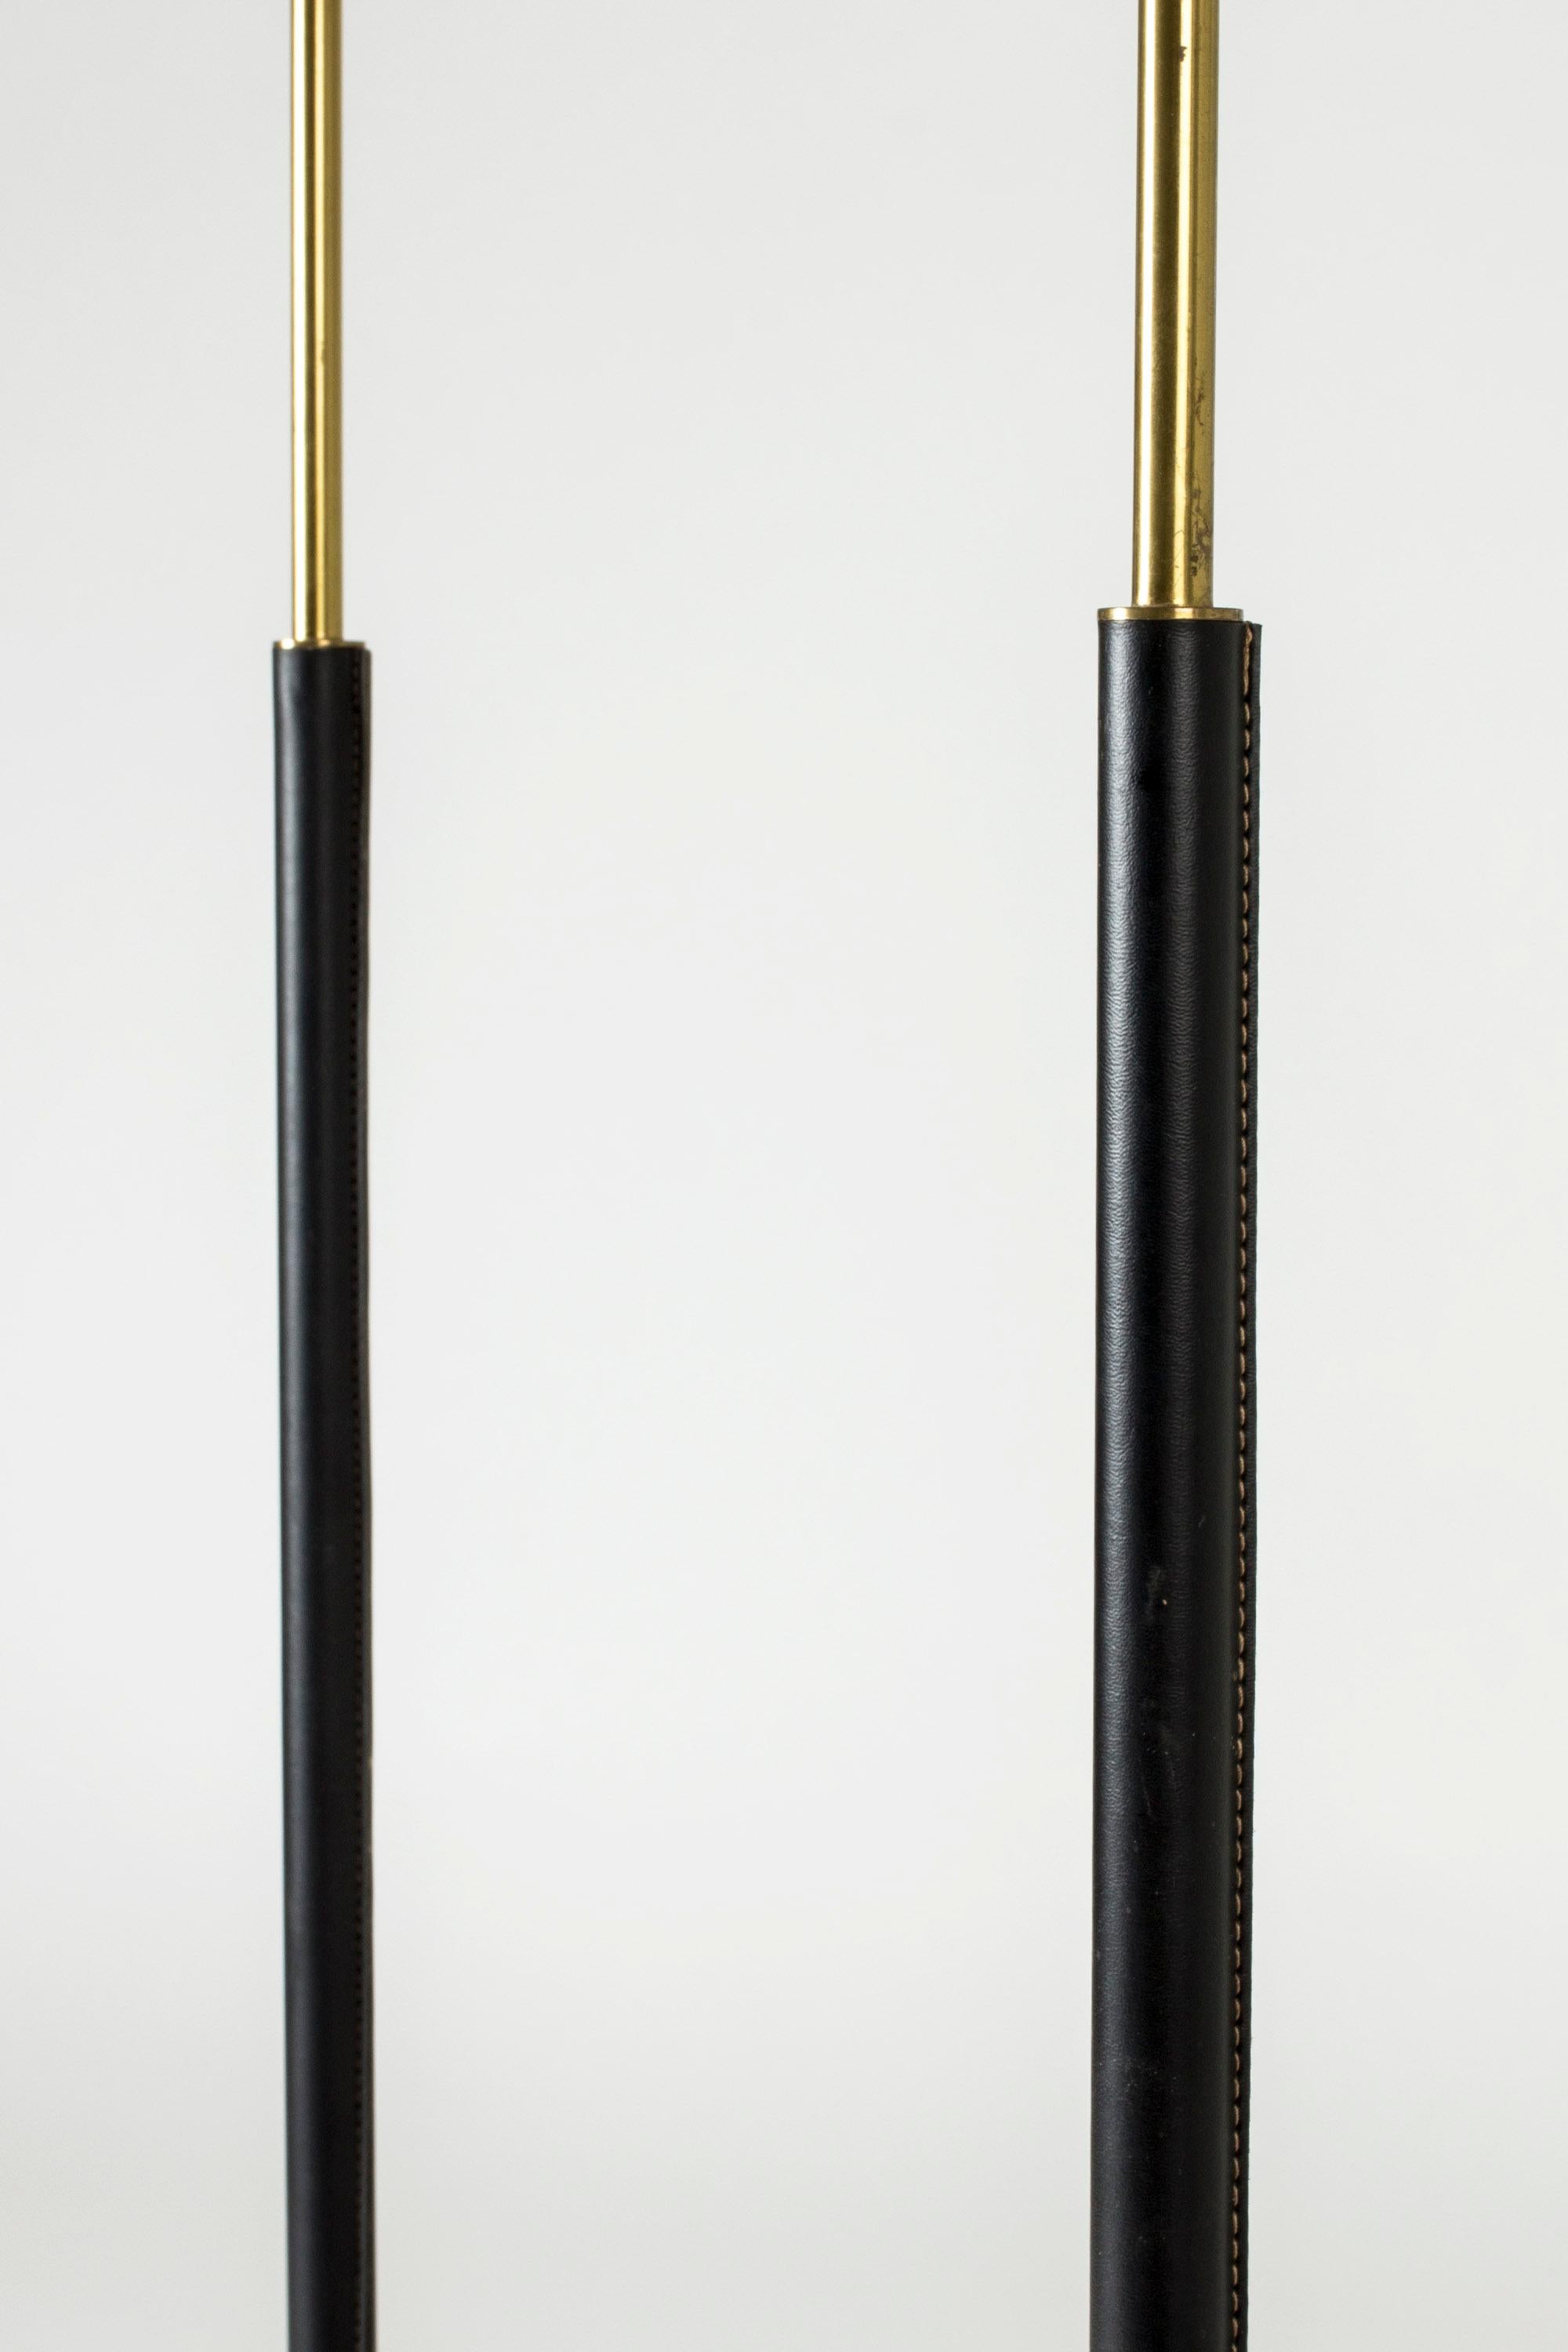 Mid-20th Century Pair of Floor Lamps from Falkenbergs Belysning, Sweden, 1960s For Sale